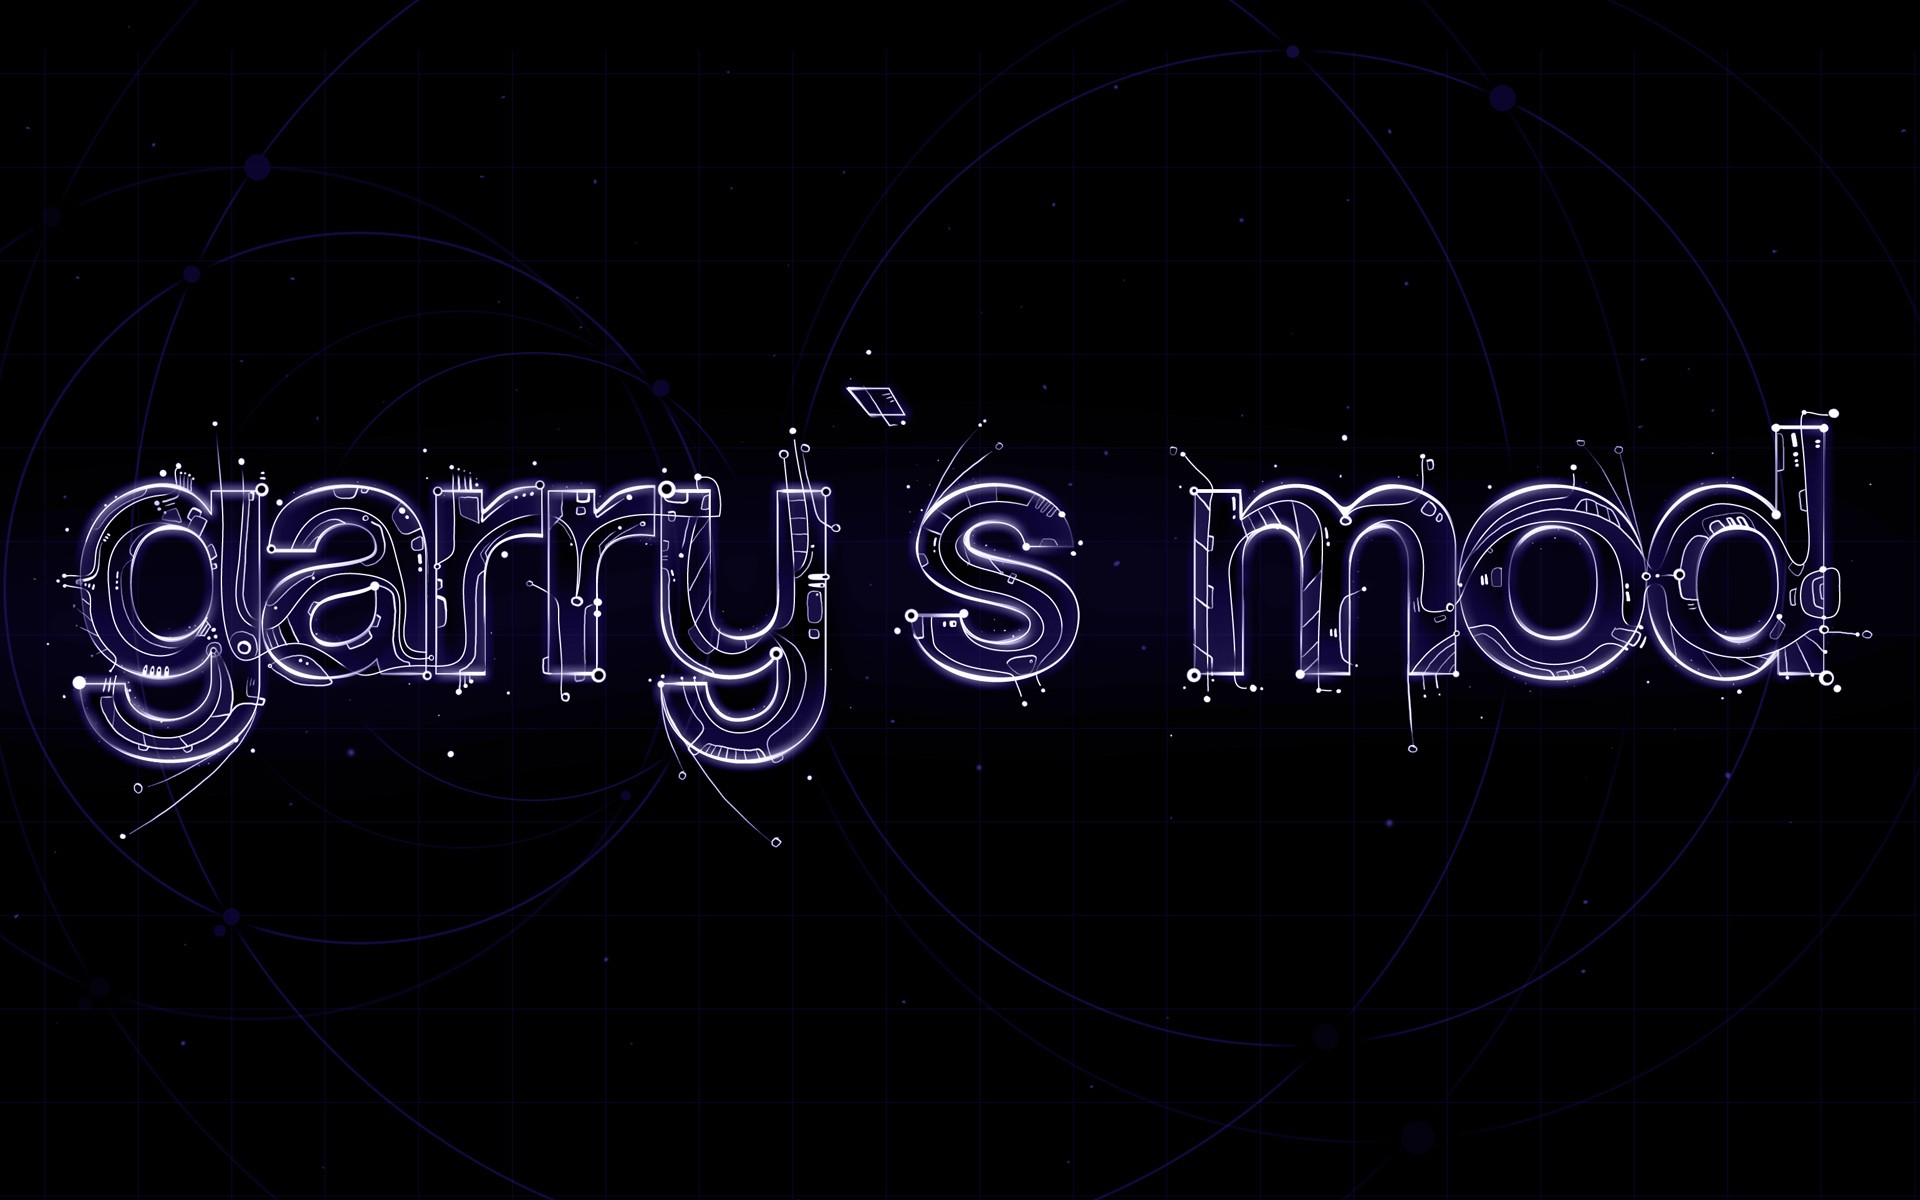 Garry S Mod Wallpaper Submited Image